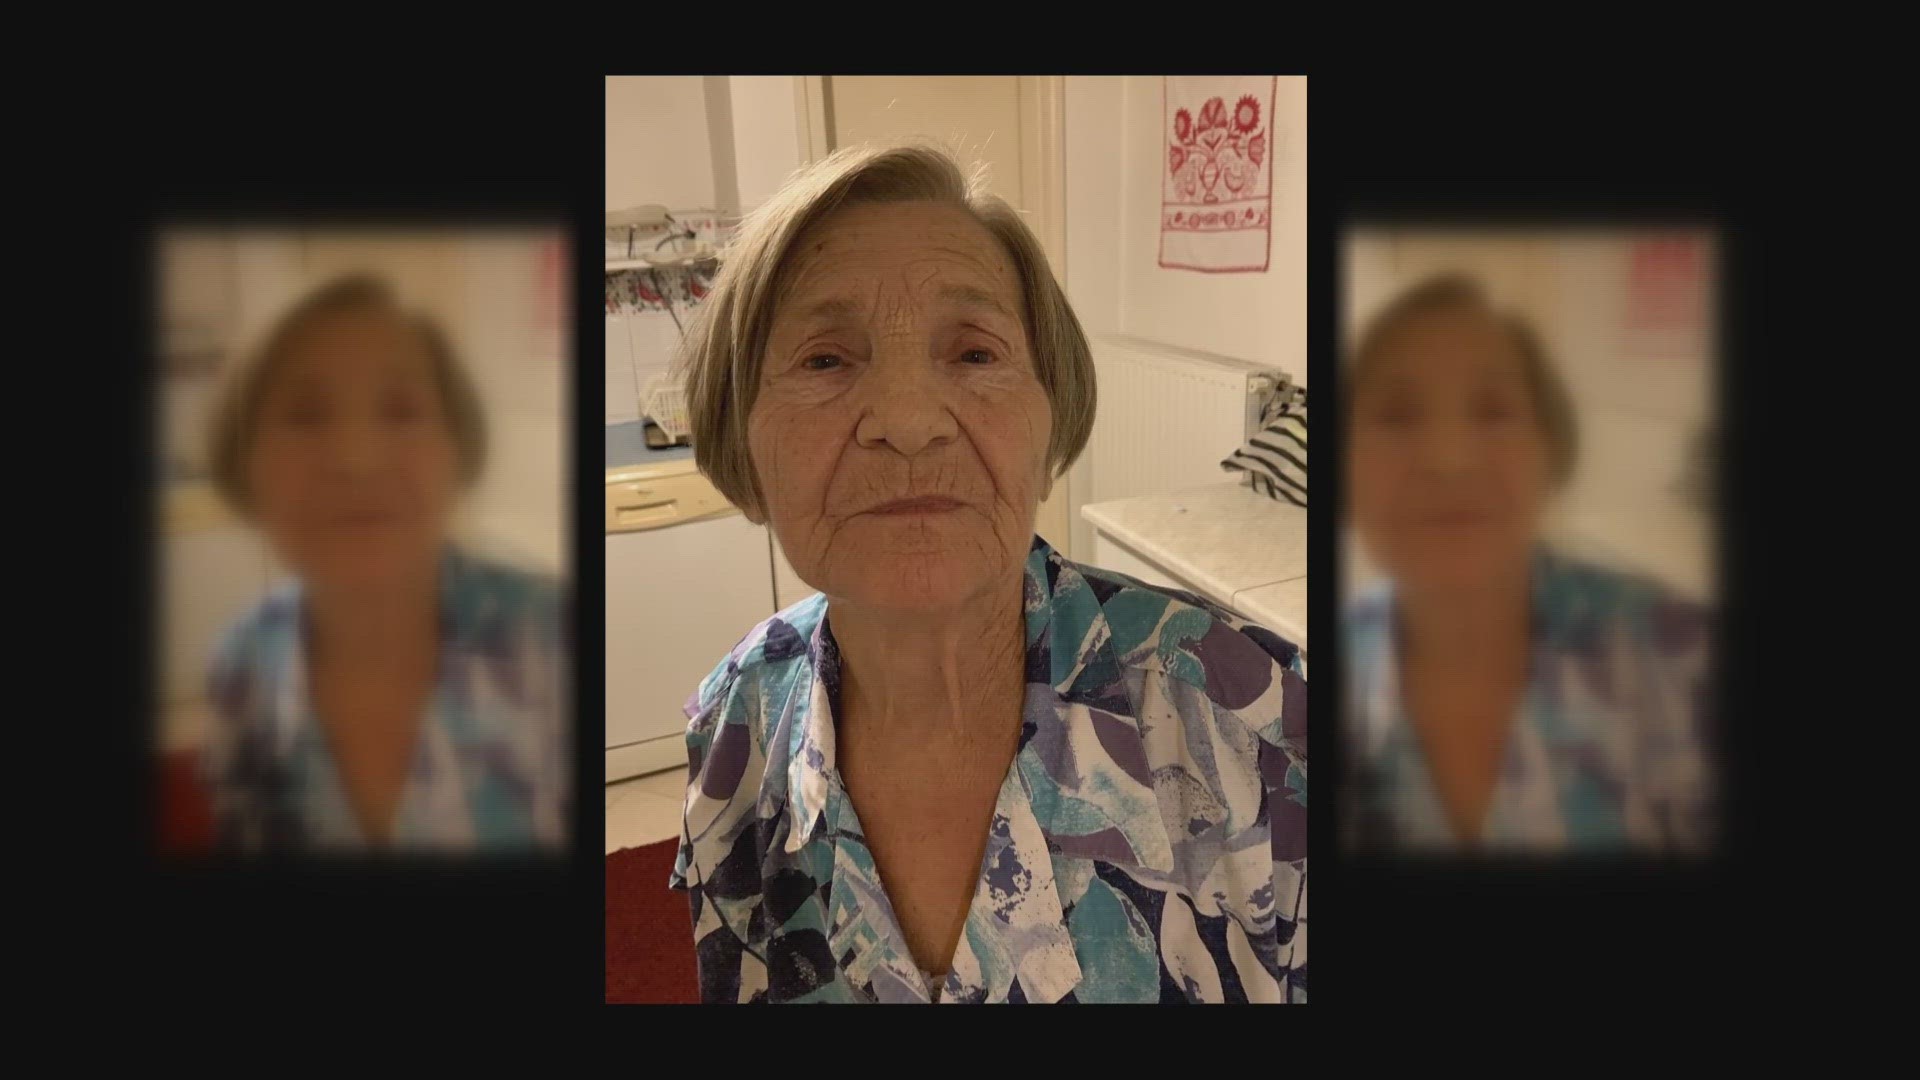 When St. Tammany Fire District #5 came to extinguish the fire, they found 84-year-old Ilona Bedo unconscious.